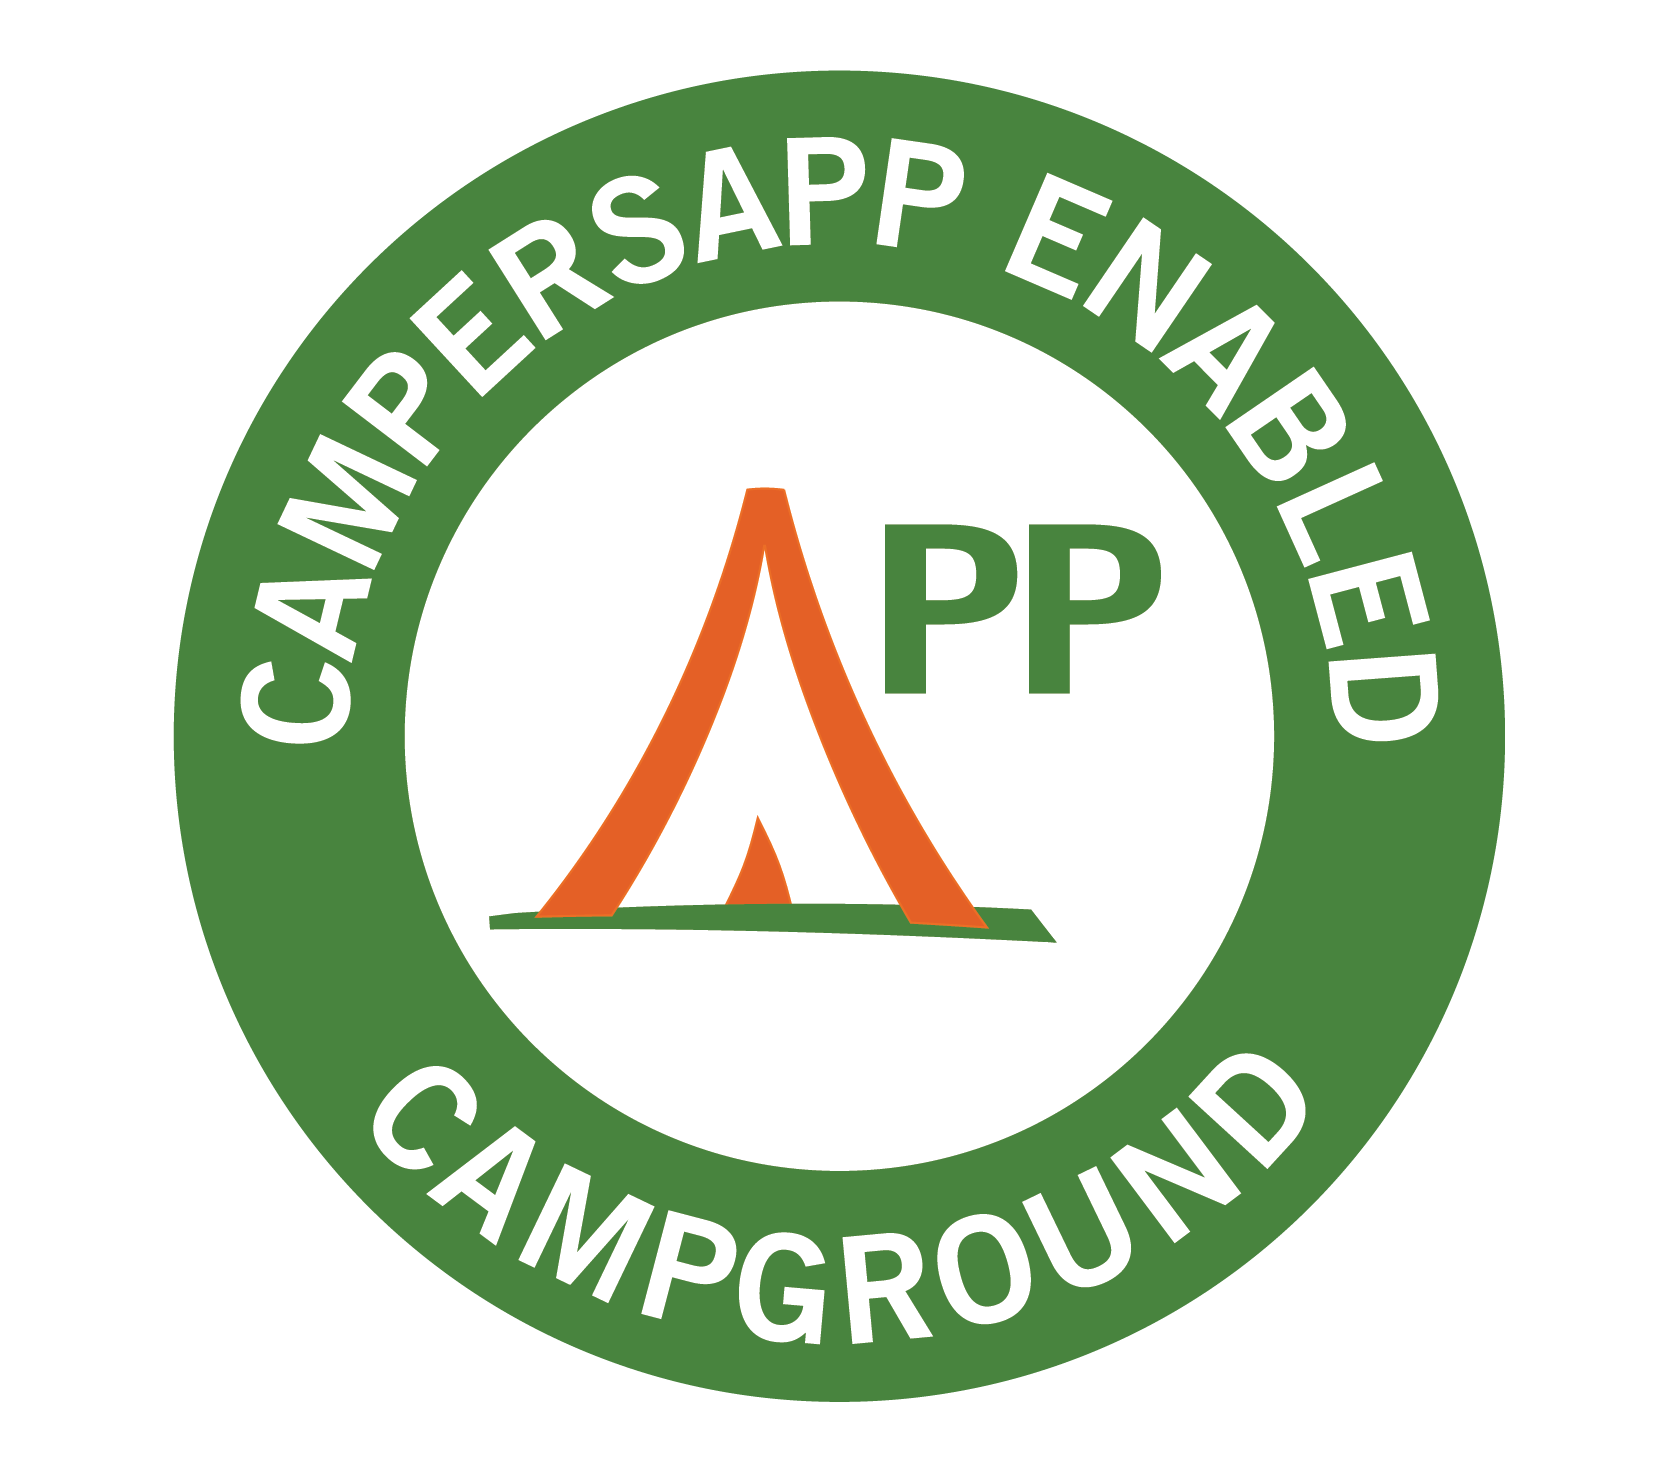 A logo that says campersapp enabled campground